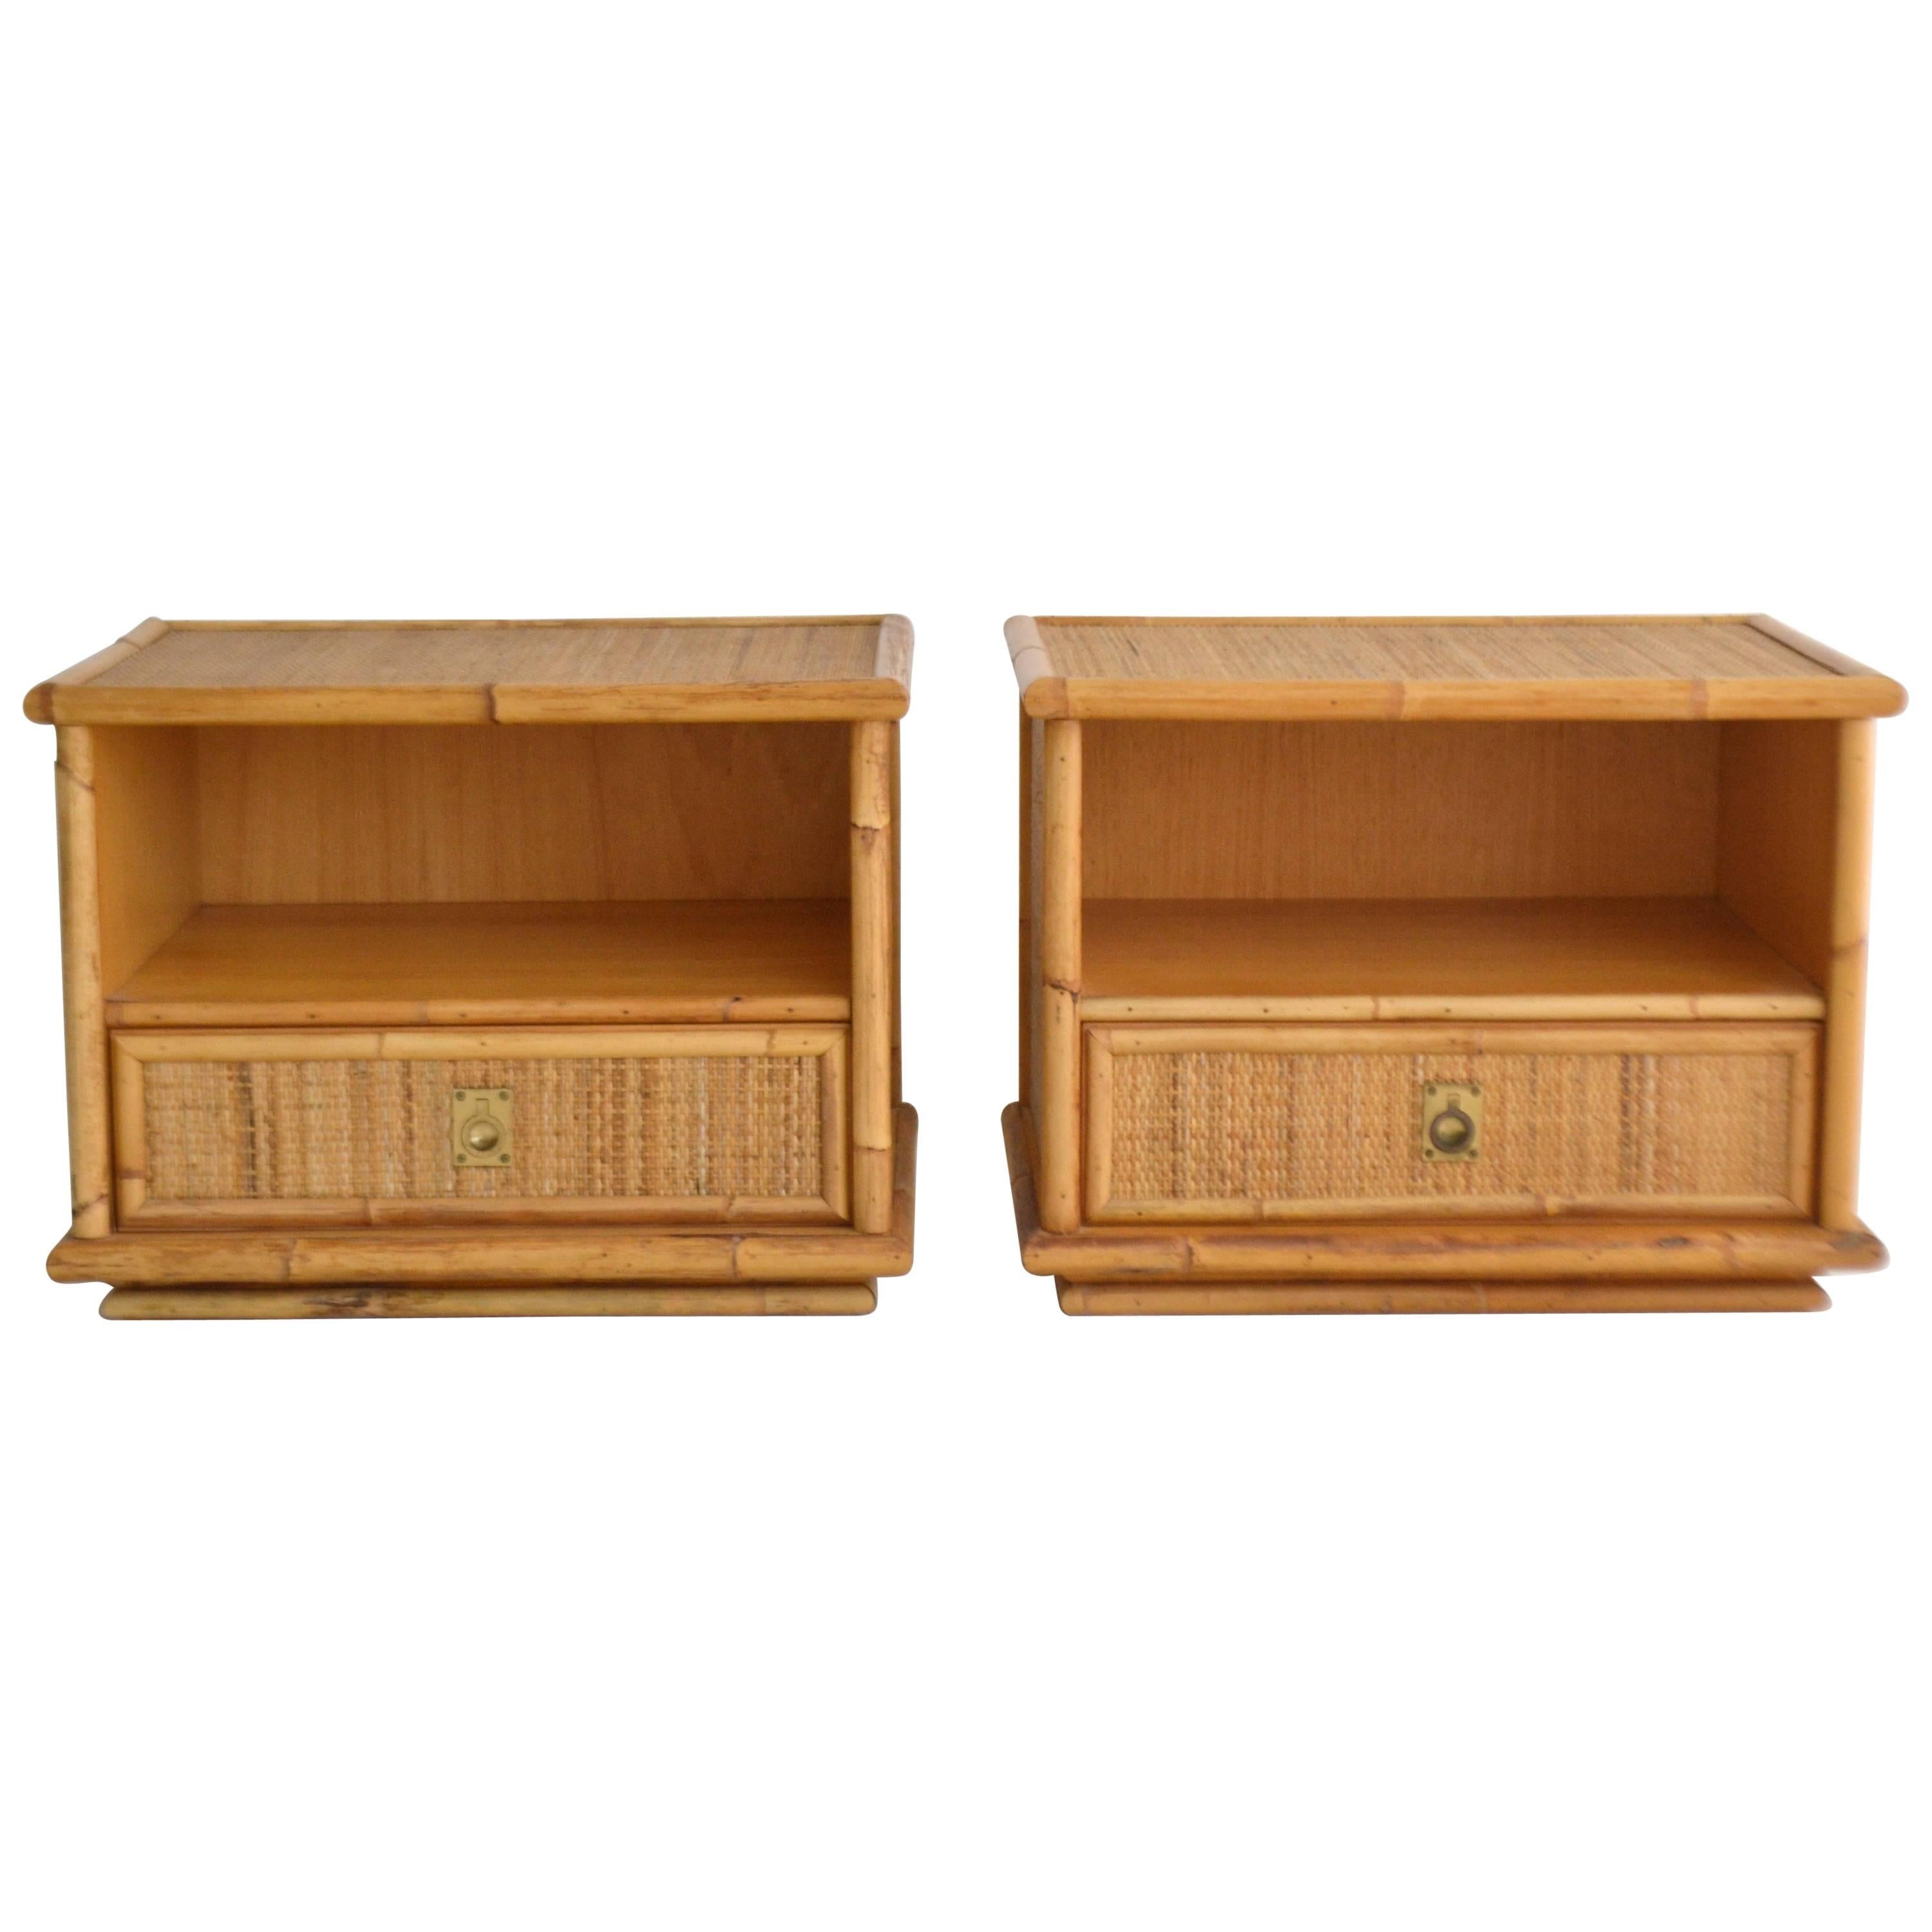 Pair of Italian Mid-Century Woven Rattan Side Tables or Nightstands